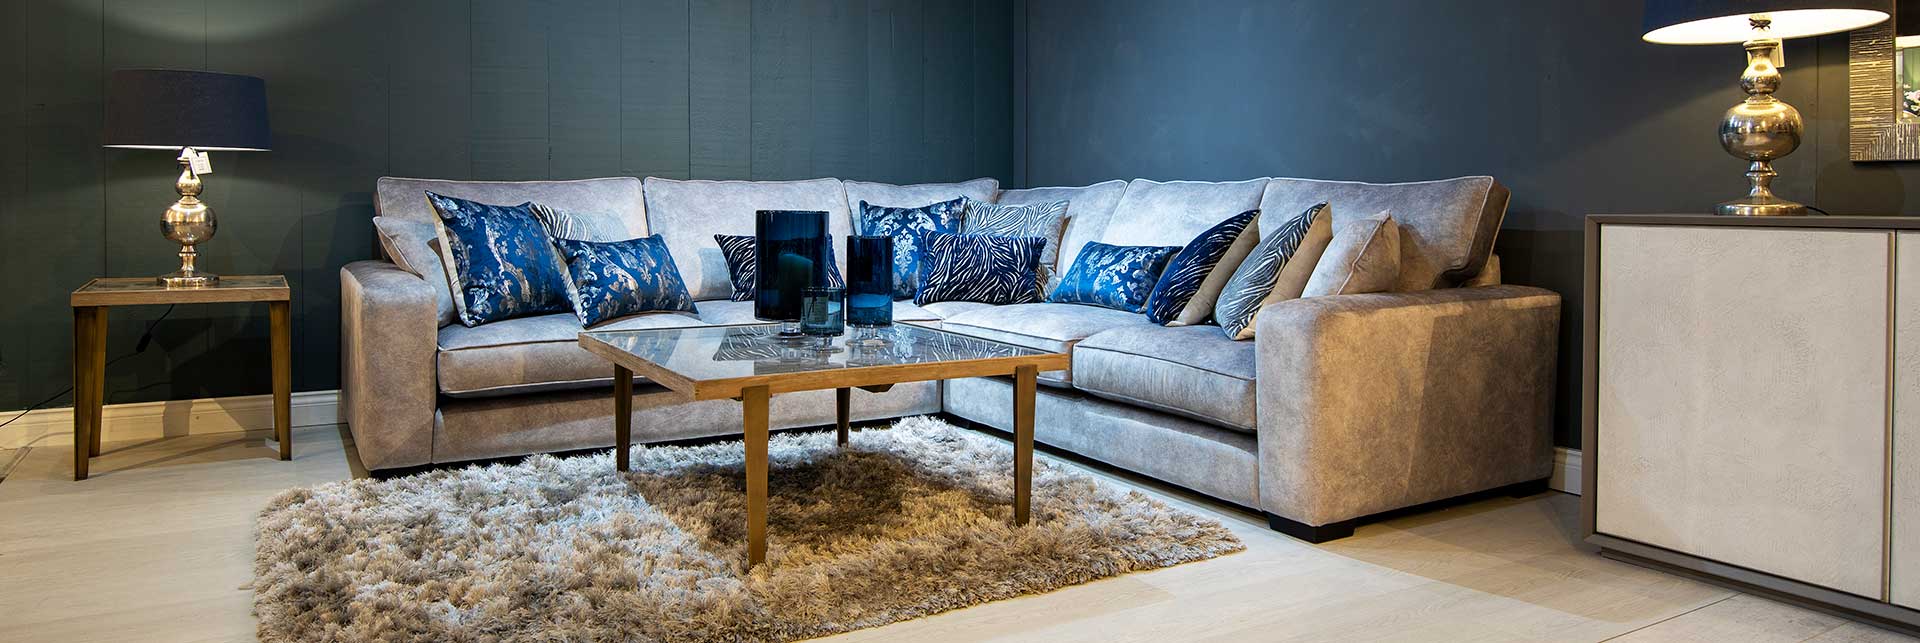 Large Lexington corner sofa with luxury silver upholstery and contrasting blue cushions